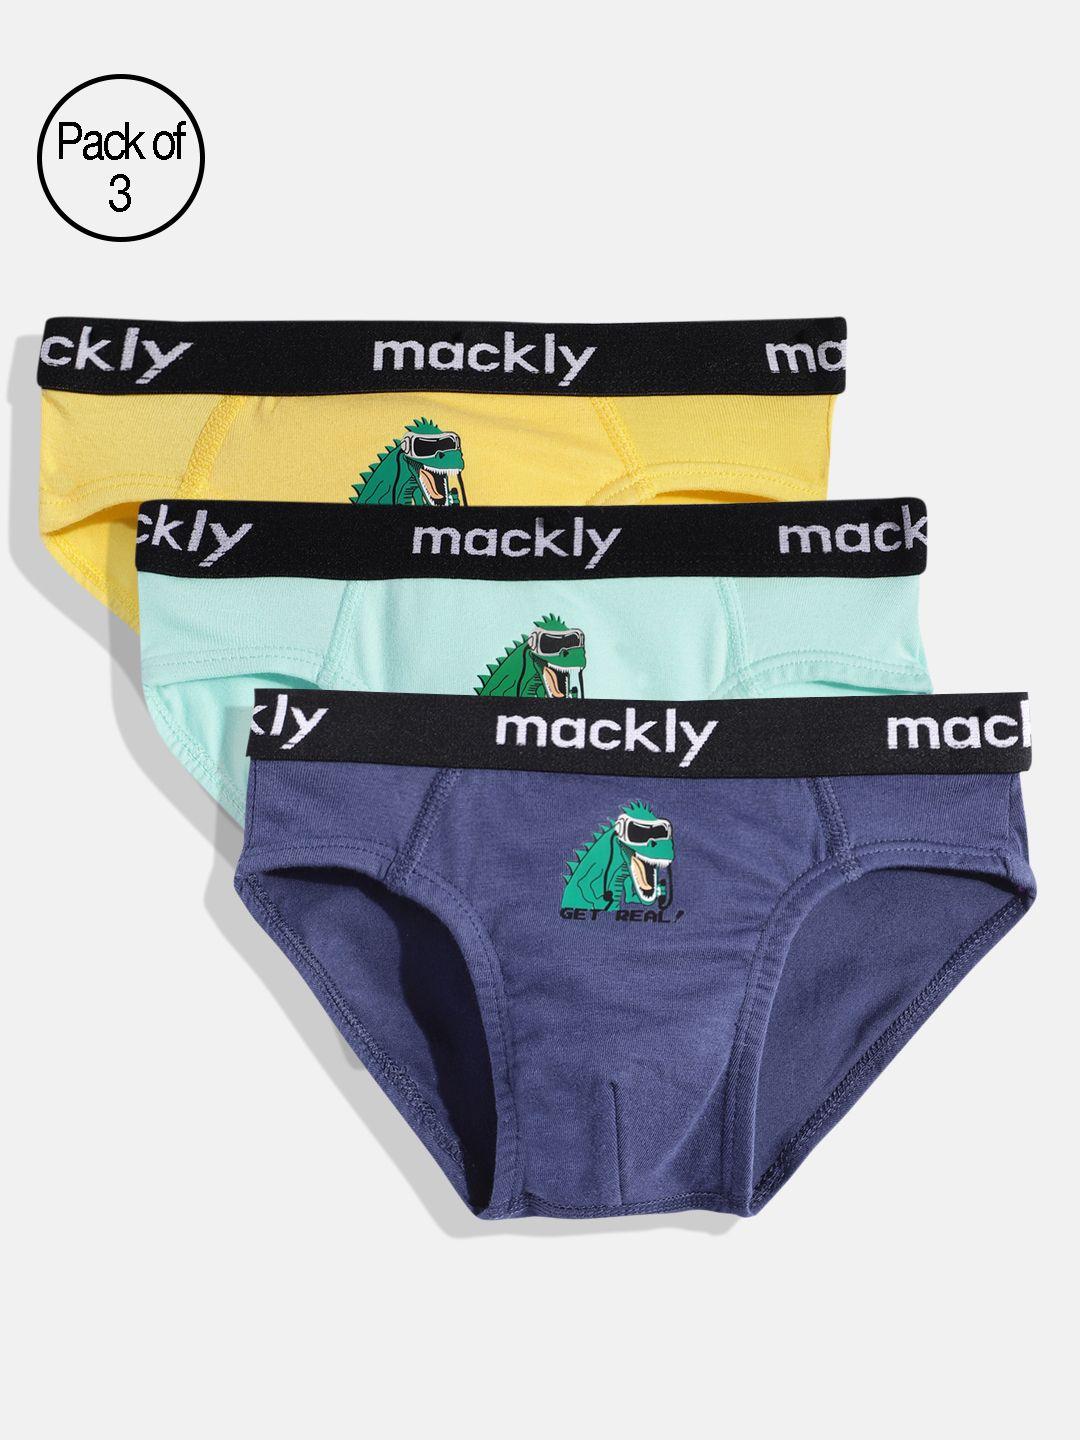 mackly boys pack of 3 blue & yellow printed briefs